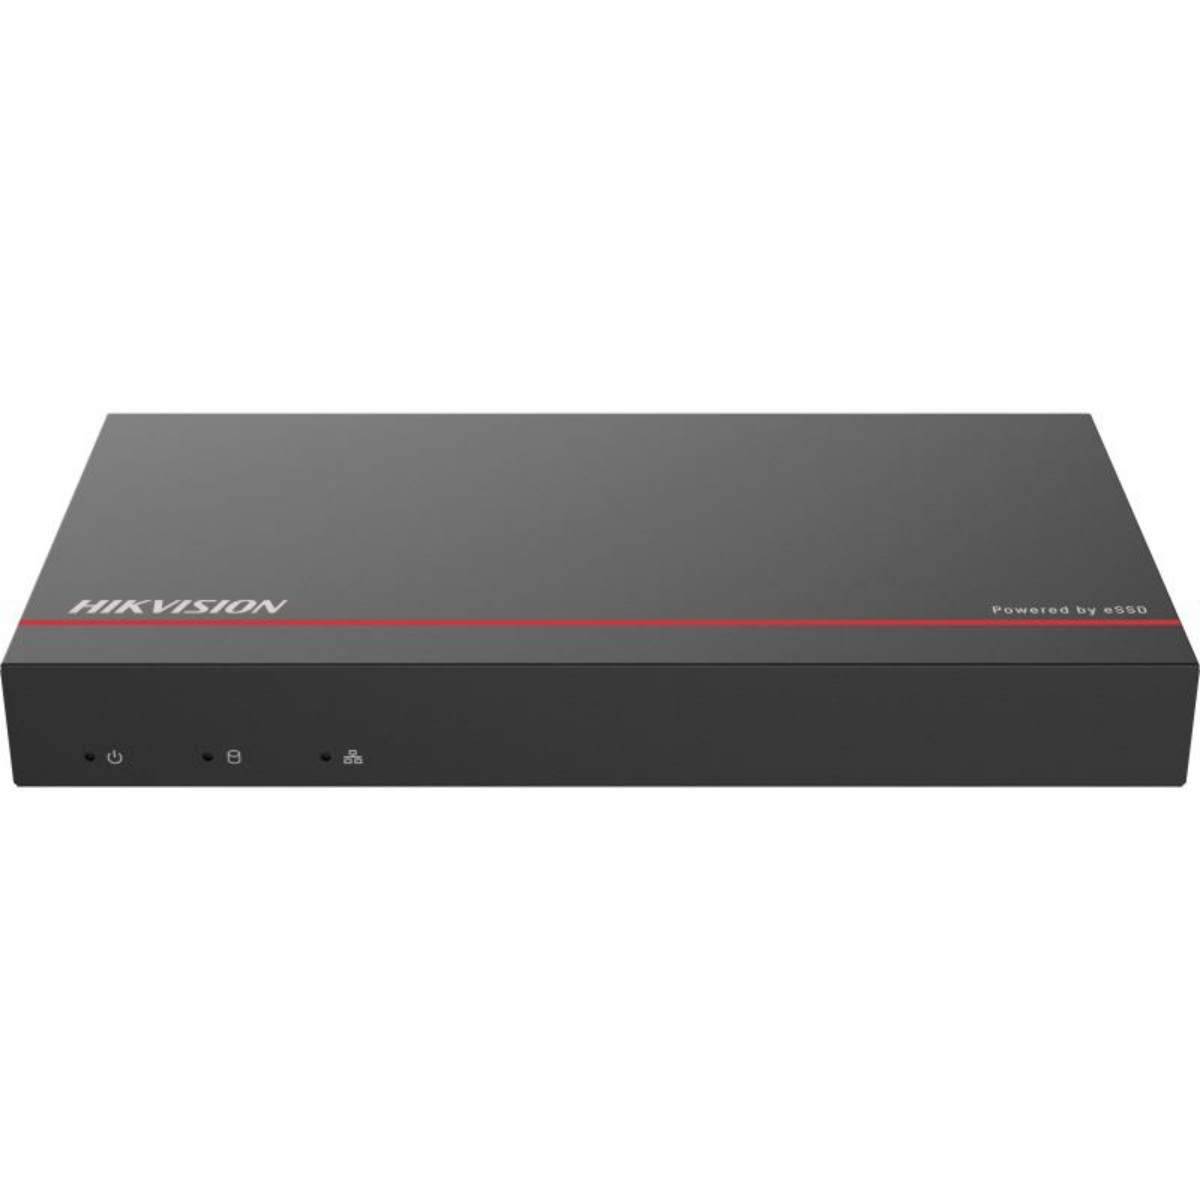 Hikvision eNVR POE 8 channel with eSSD Technology, and Built-in 1TB SSD – DS-E08NI-Q1/8P